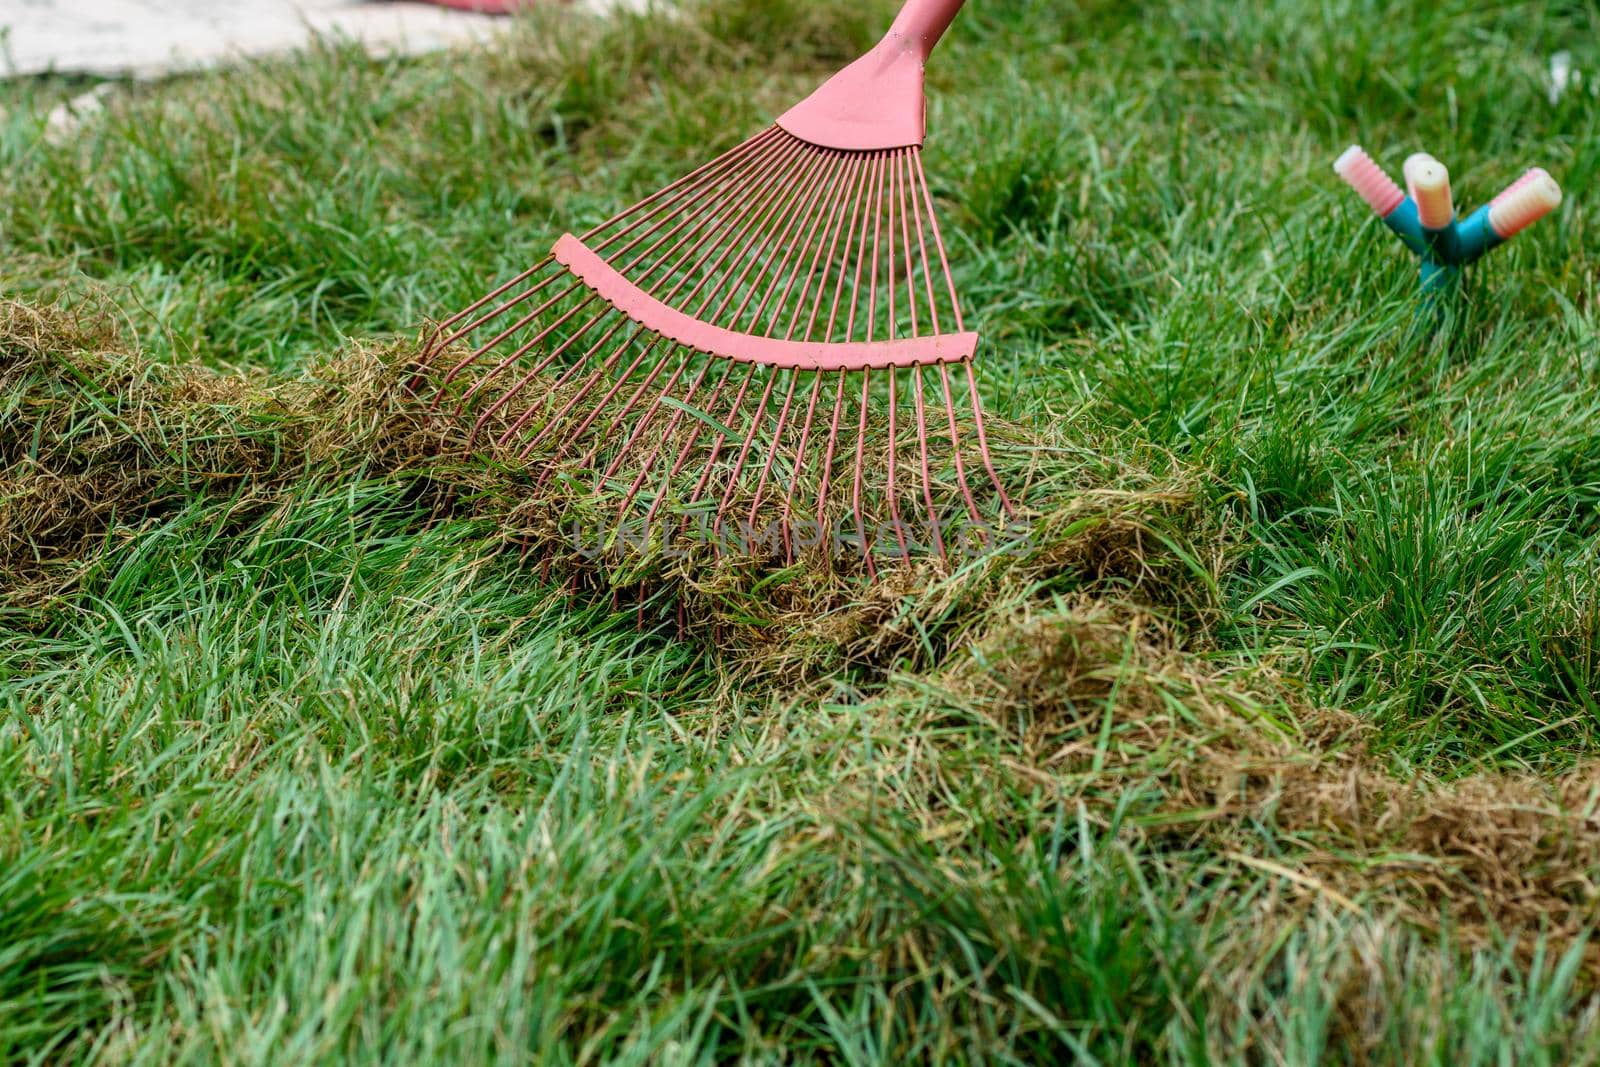 Cleaning cut grass with a fan rake by Madhourse